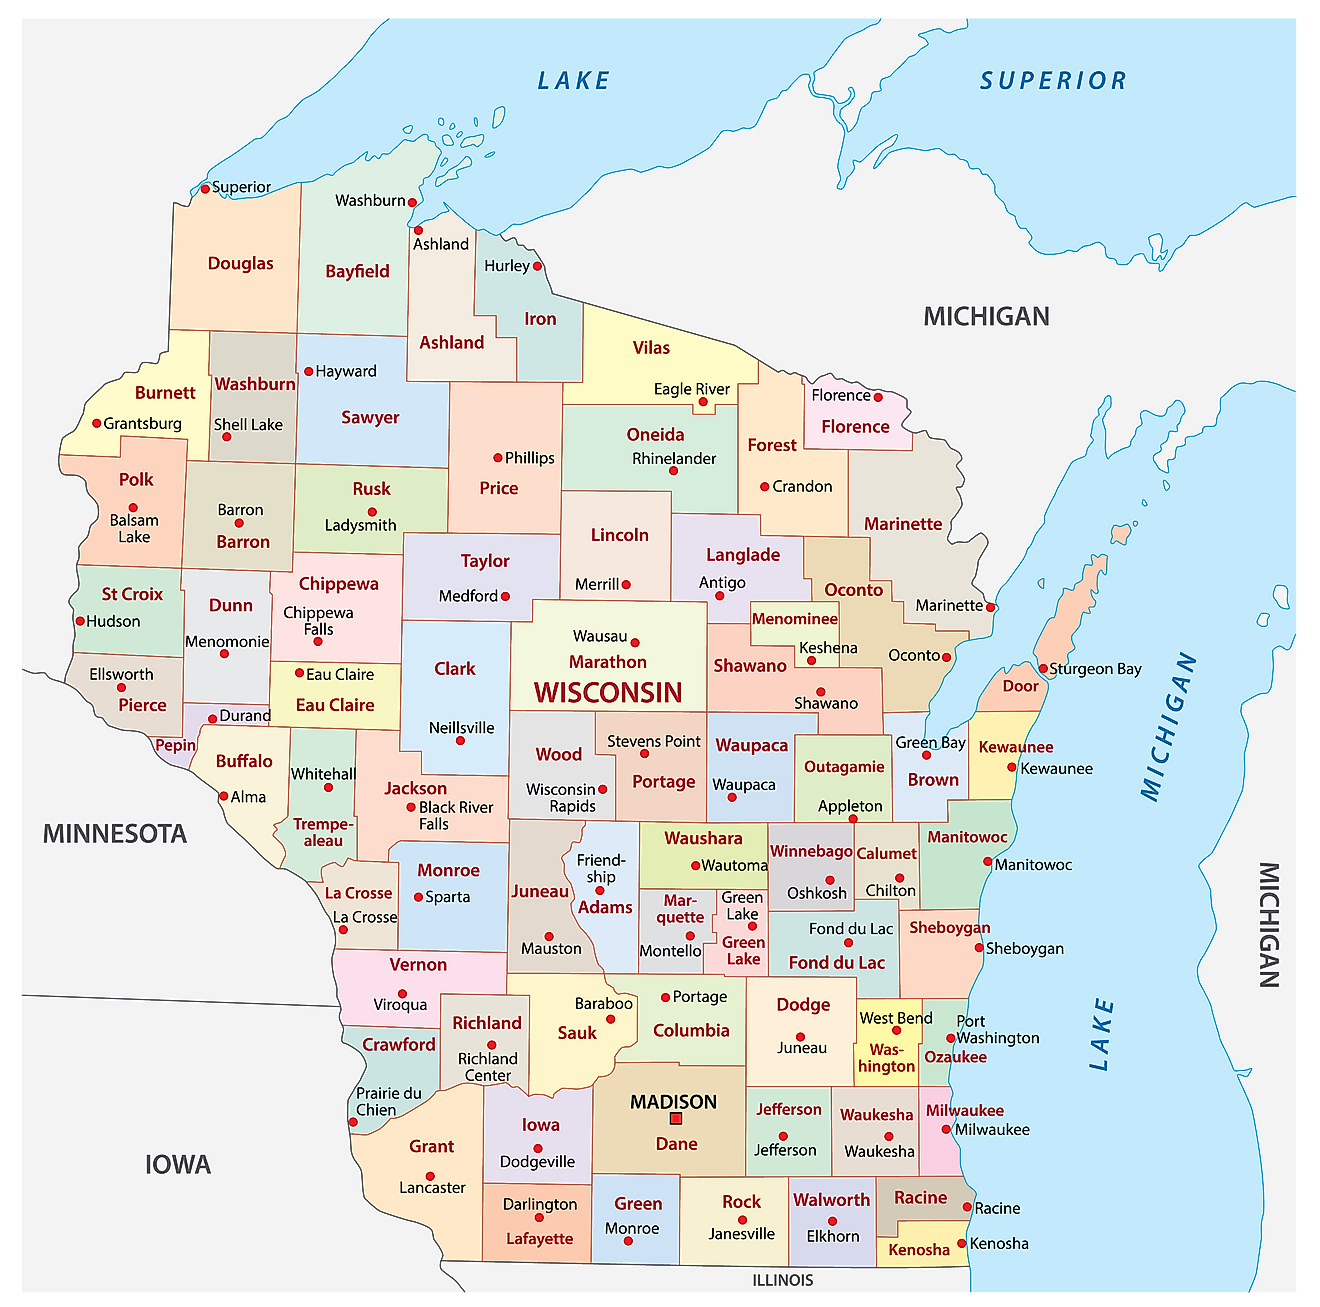 Administrative map of Wisconsin showing its 72 counties and the capital - Madison